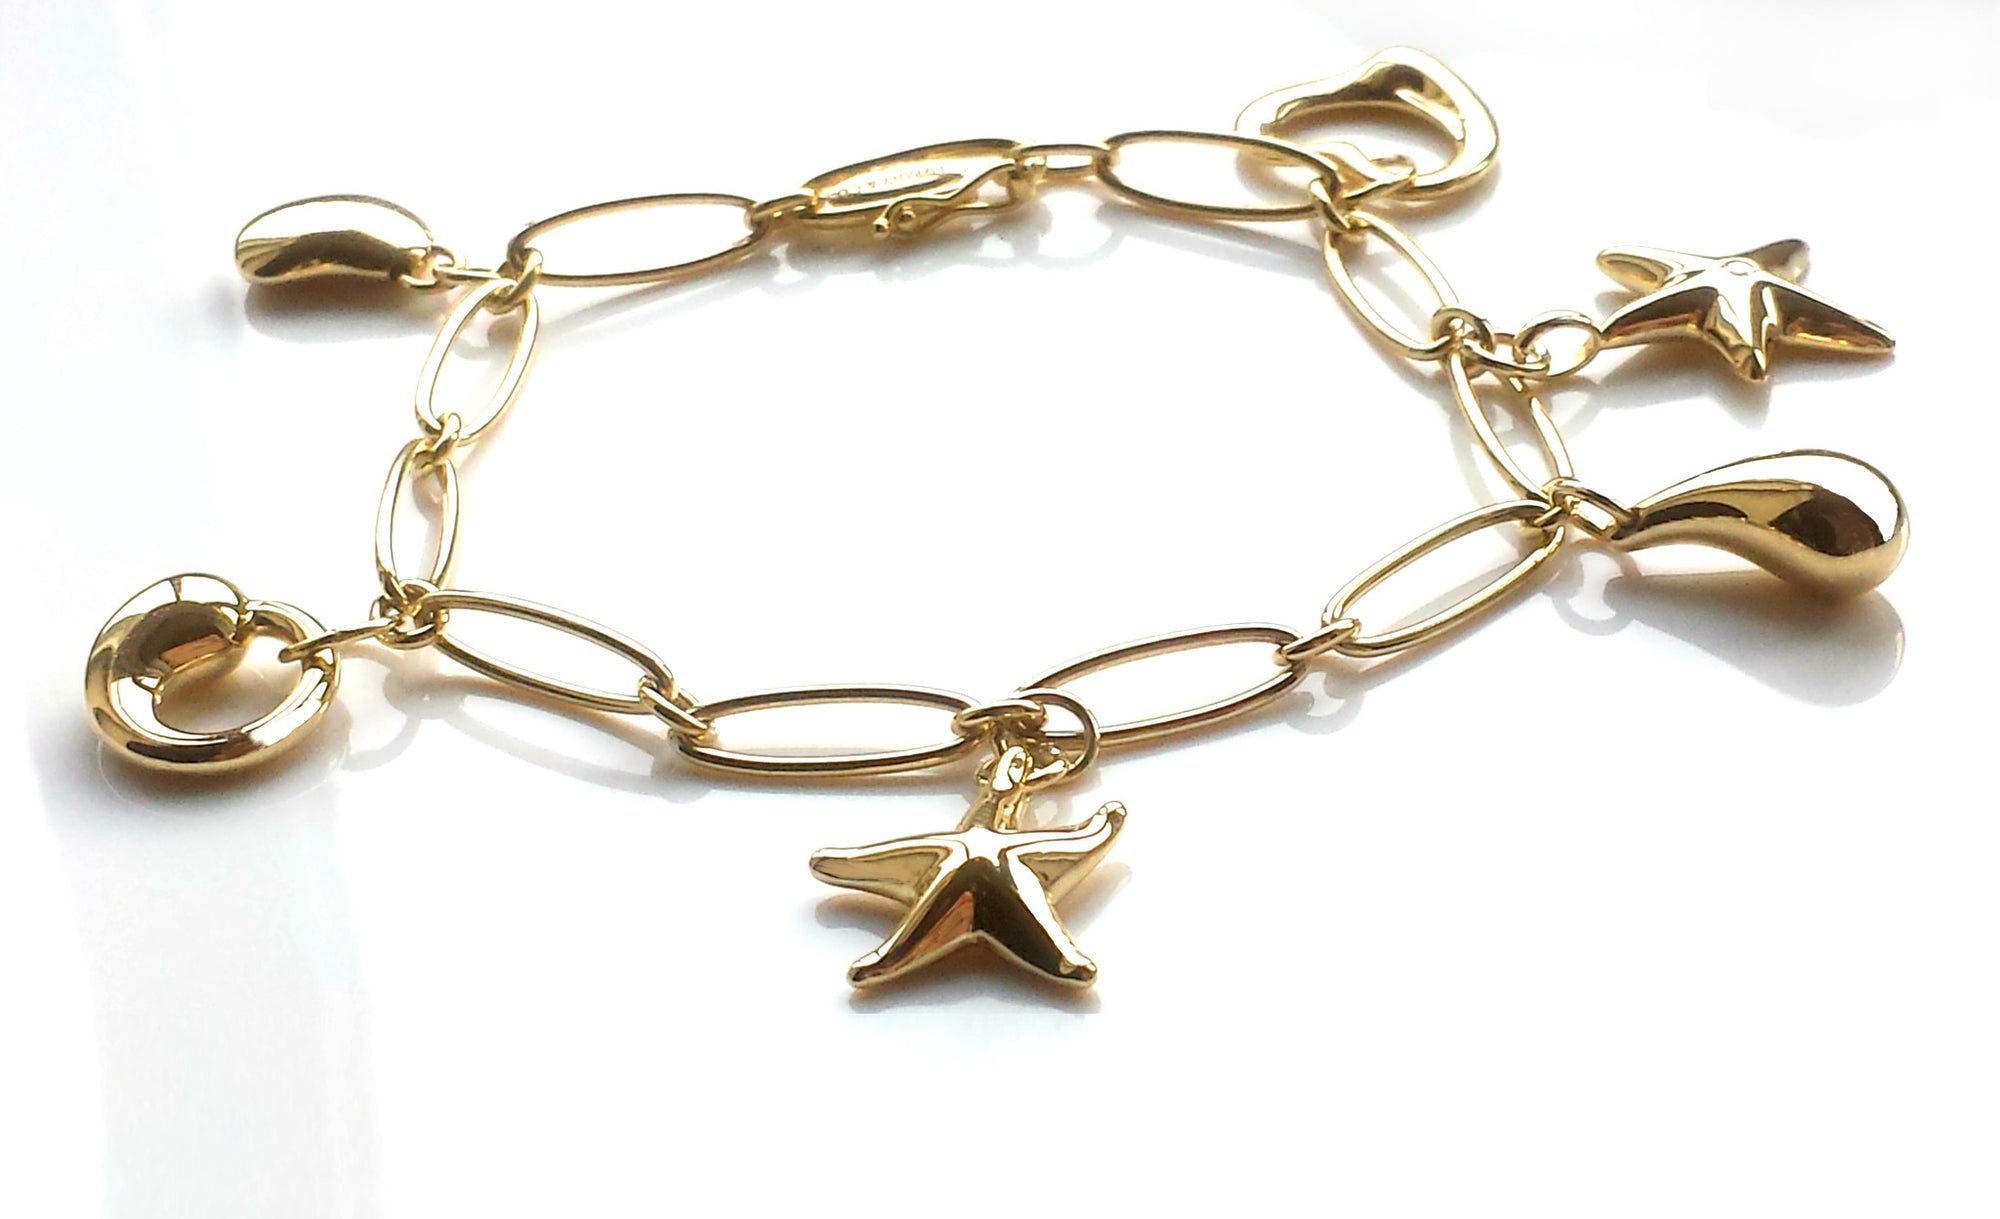 Tiffany & Co. Charm Bracelet by Elsa Peretti in 18k Gold – with Extra Charm